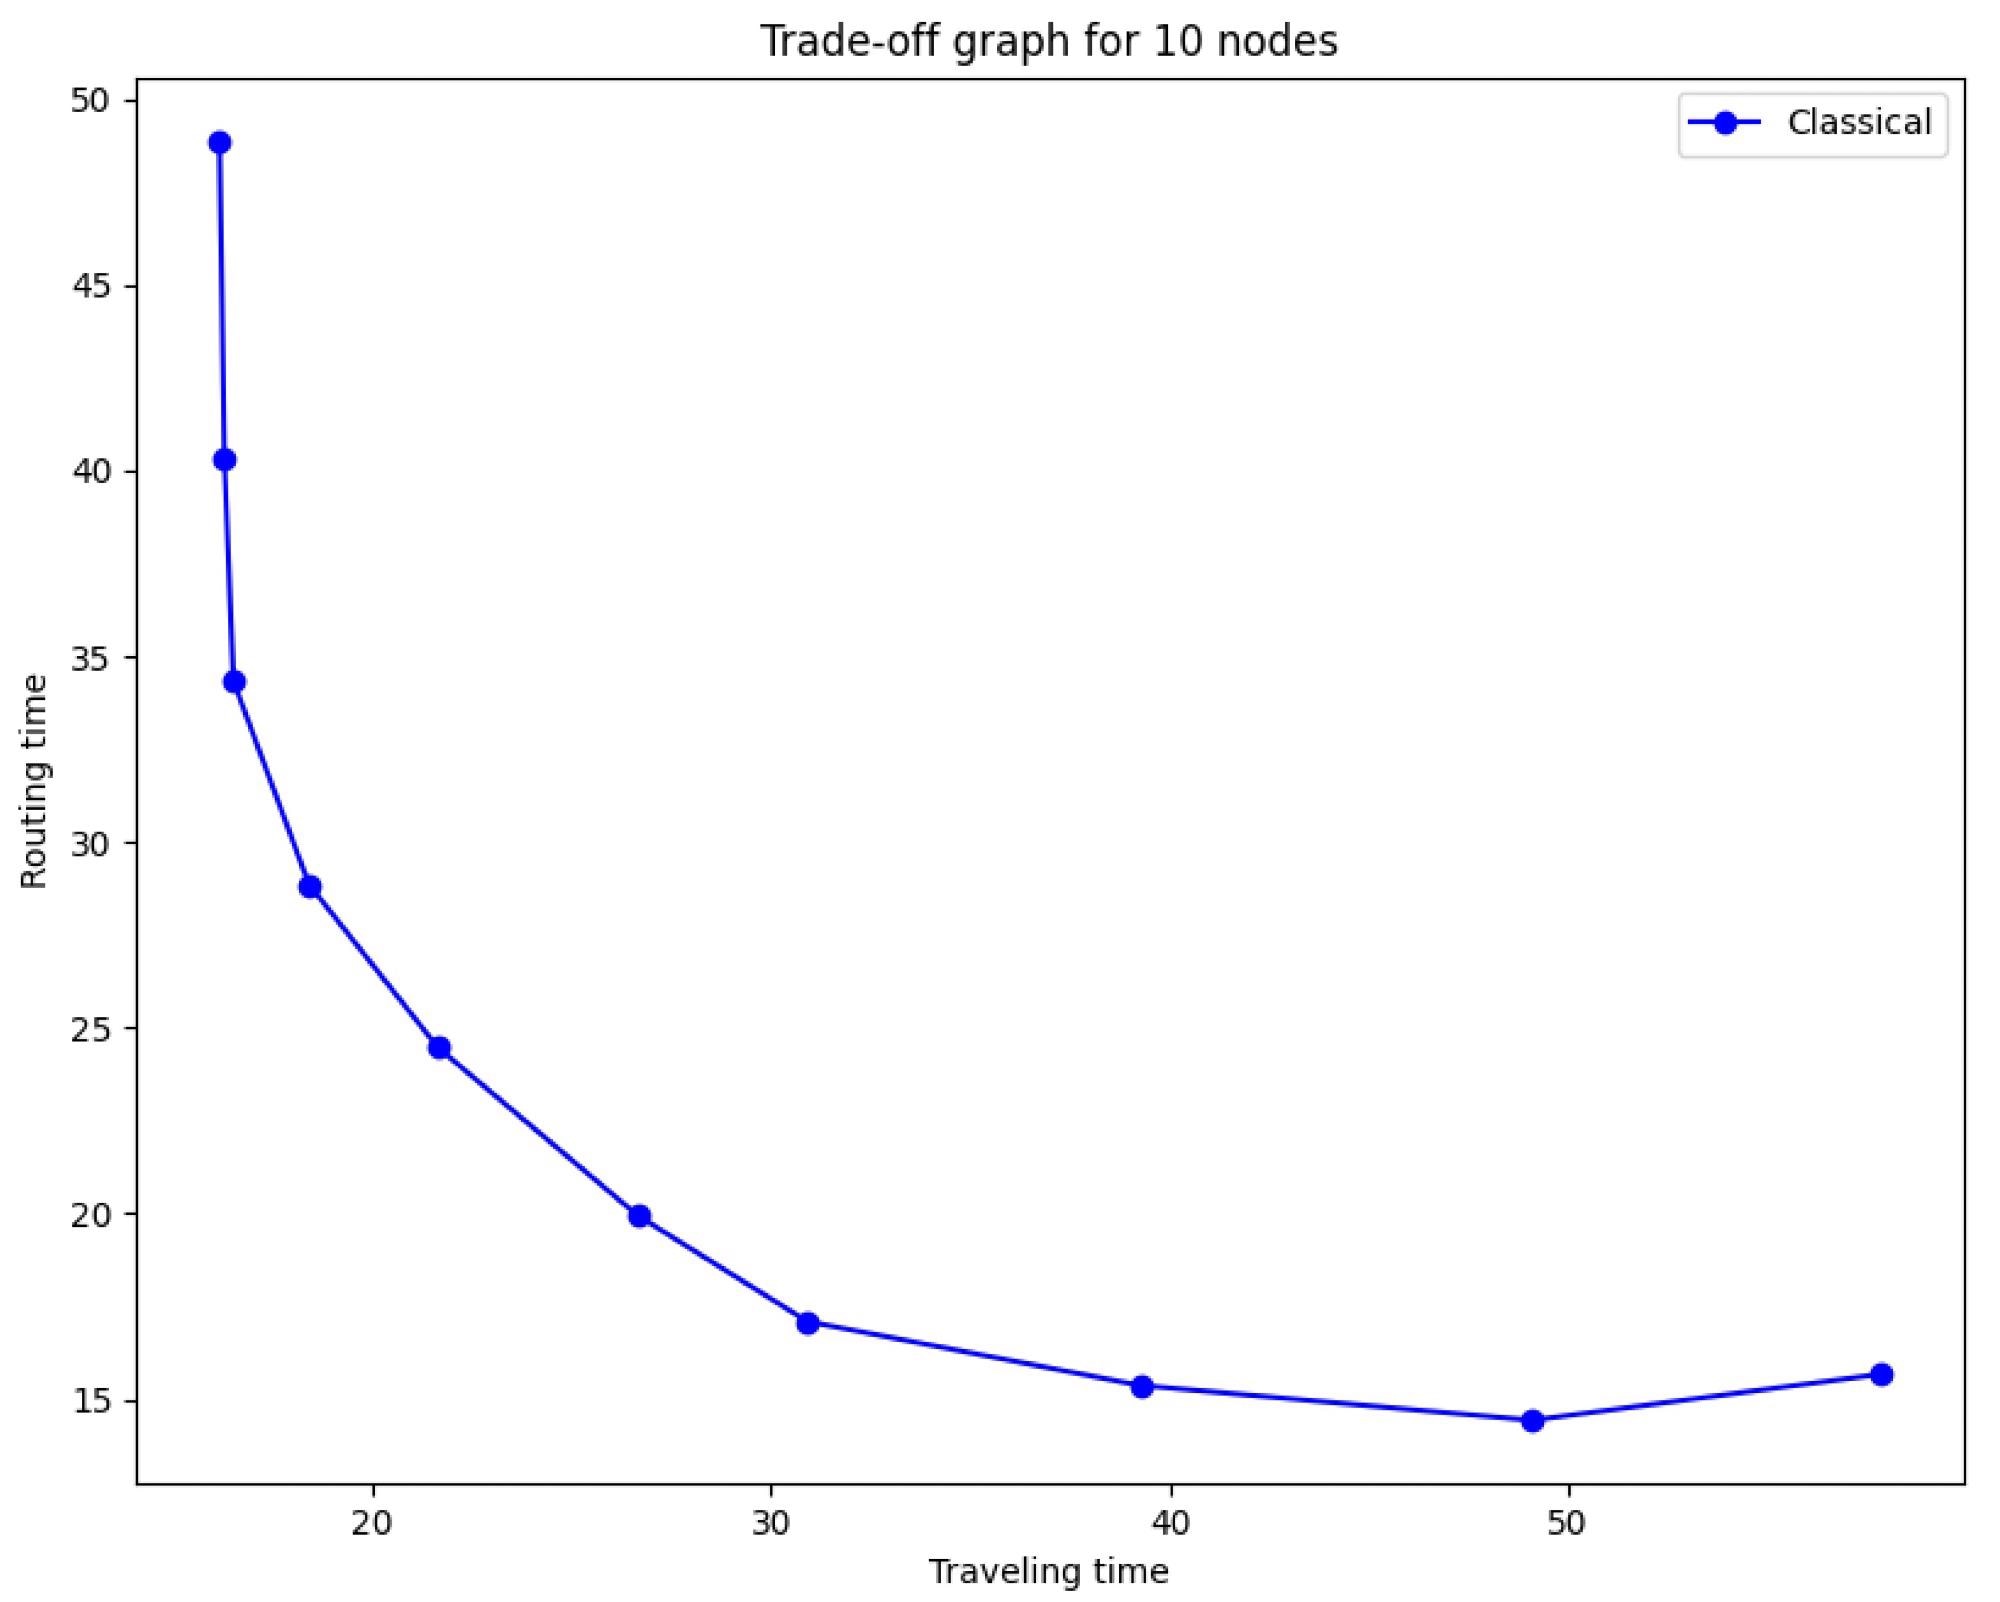 Trade-off between traveling and routing time for different p values between 0 and 0.9. Values of p closer to 0 give a high traveling time and low routing time. Values of p closer to 1 give a low traveling time and high routing time.